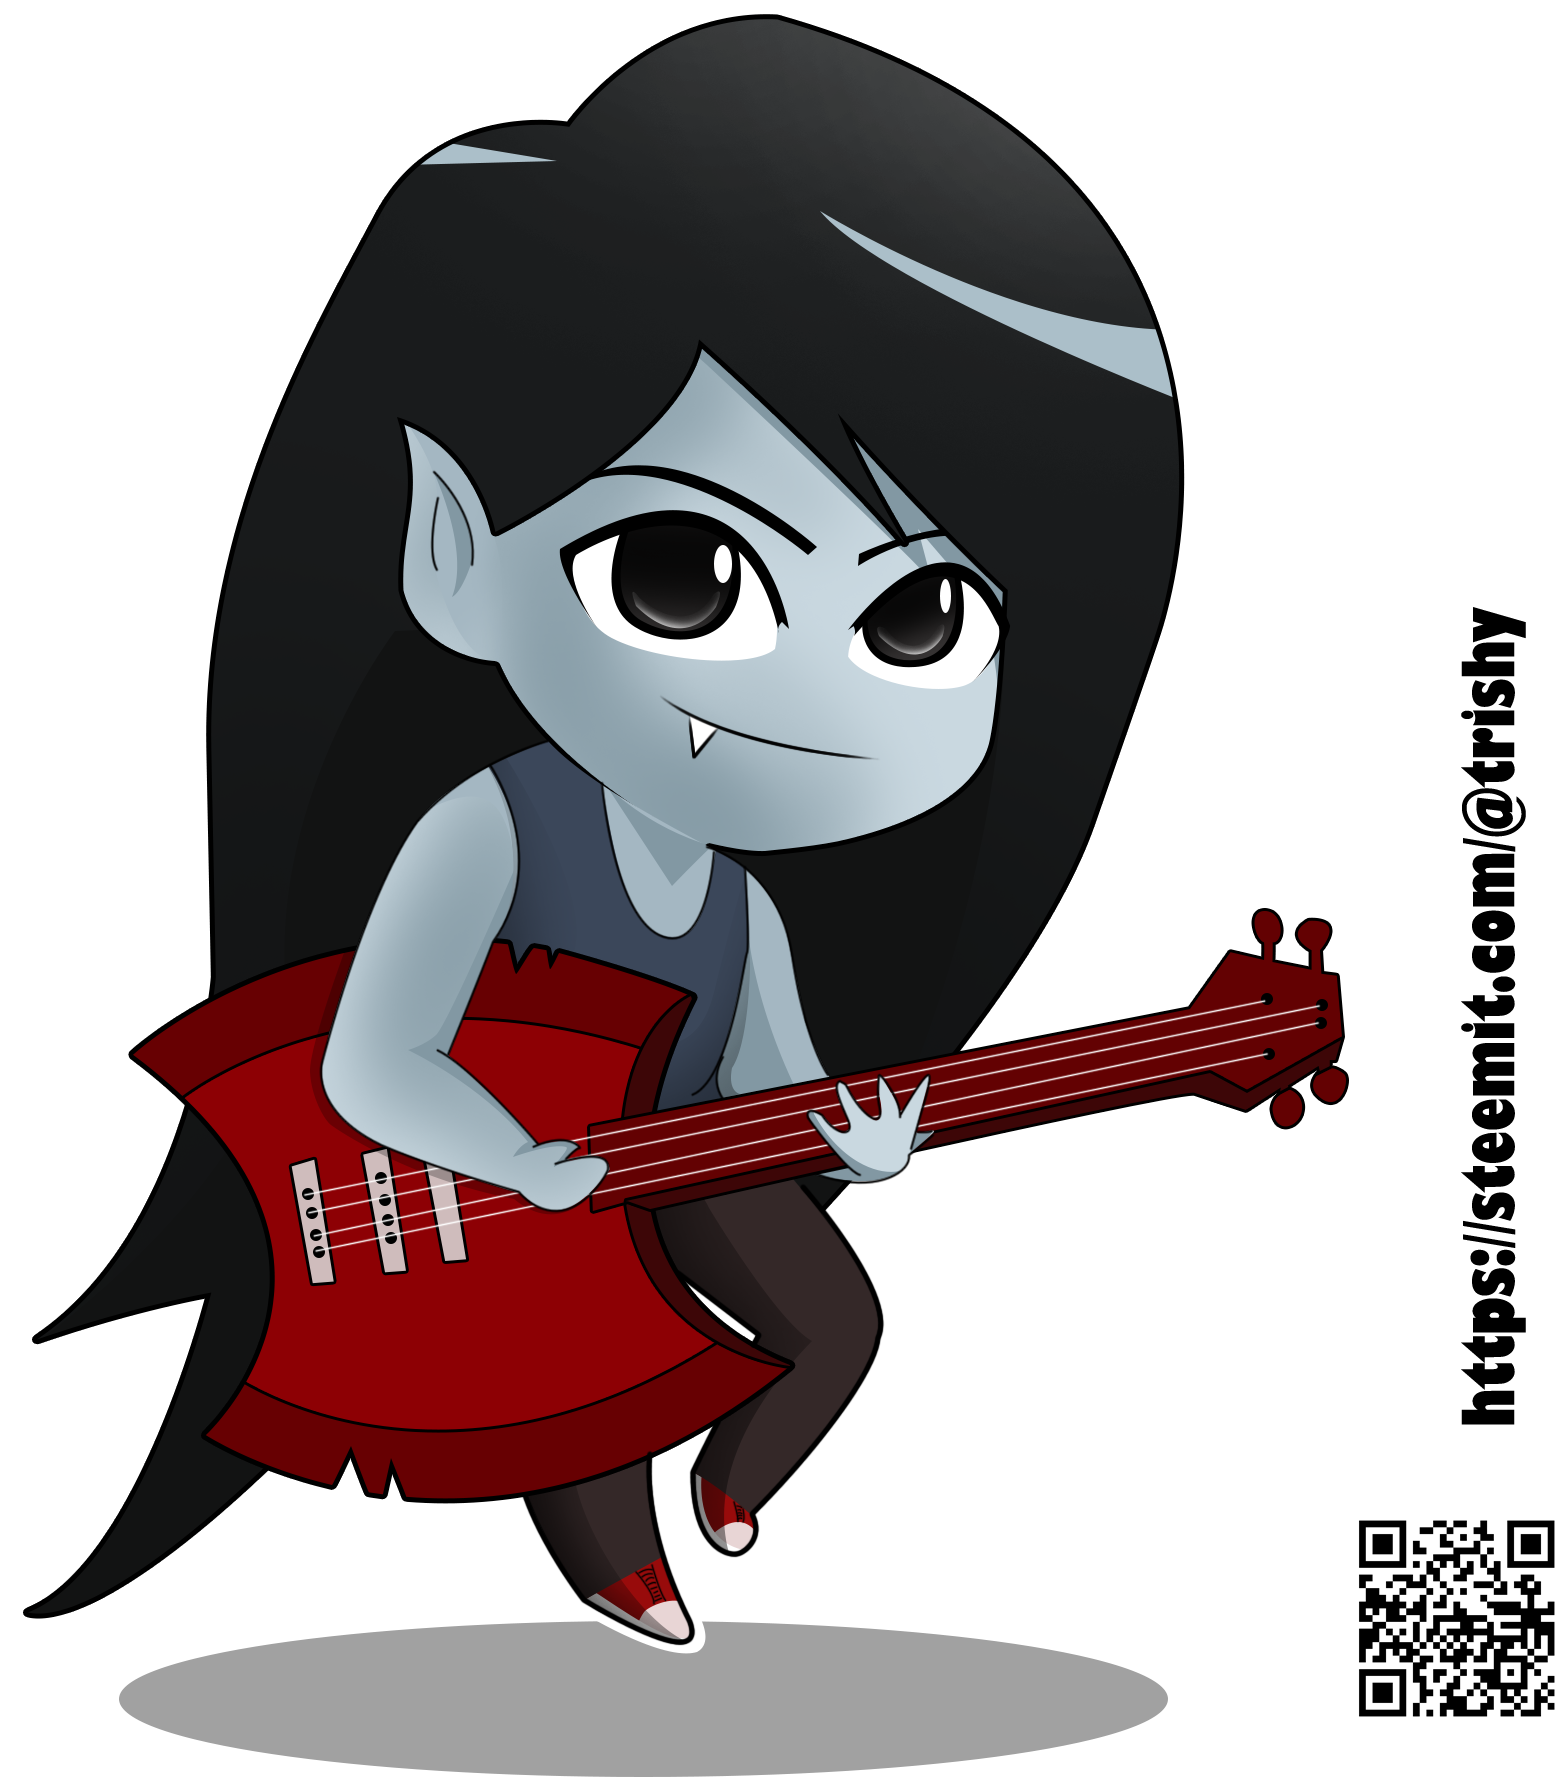 So One Of My Recent Post Was A Fanart Of Finn The Human - Marceline The Vampire Queen (2000x1998)